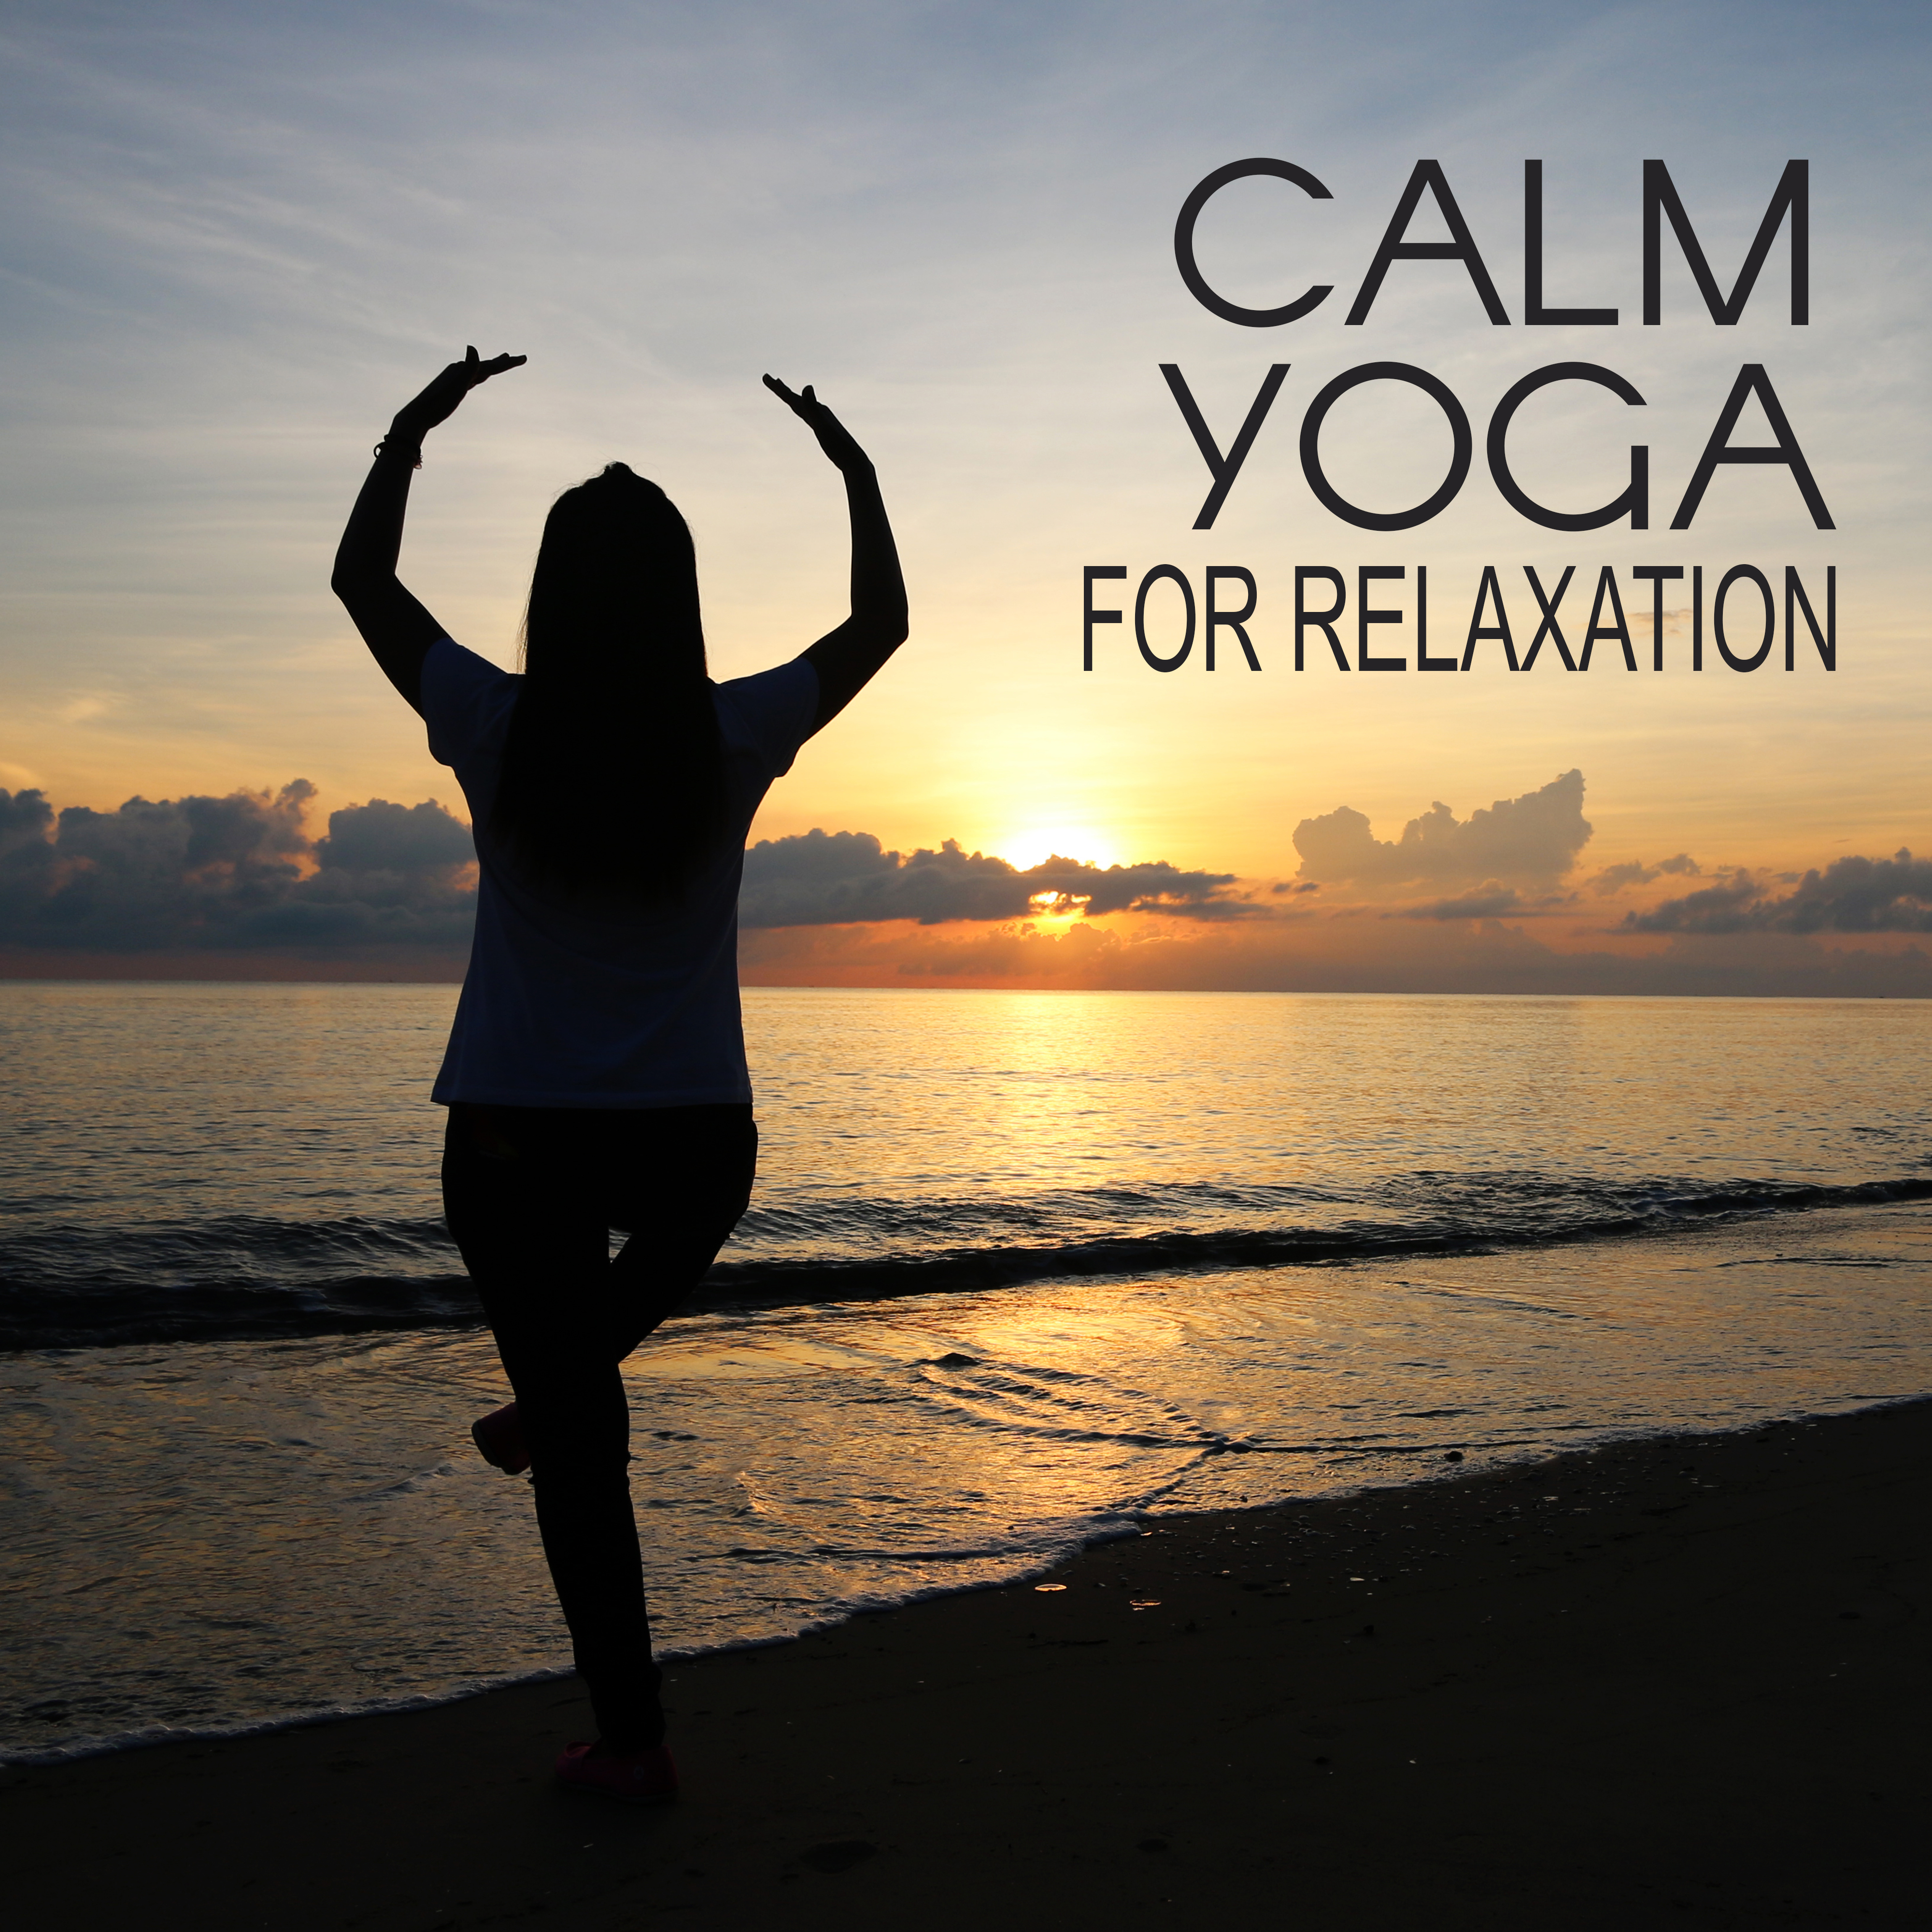 Calm Yoga for Relaxation